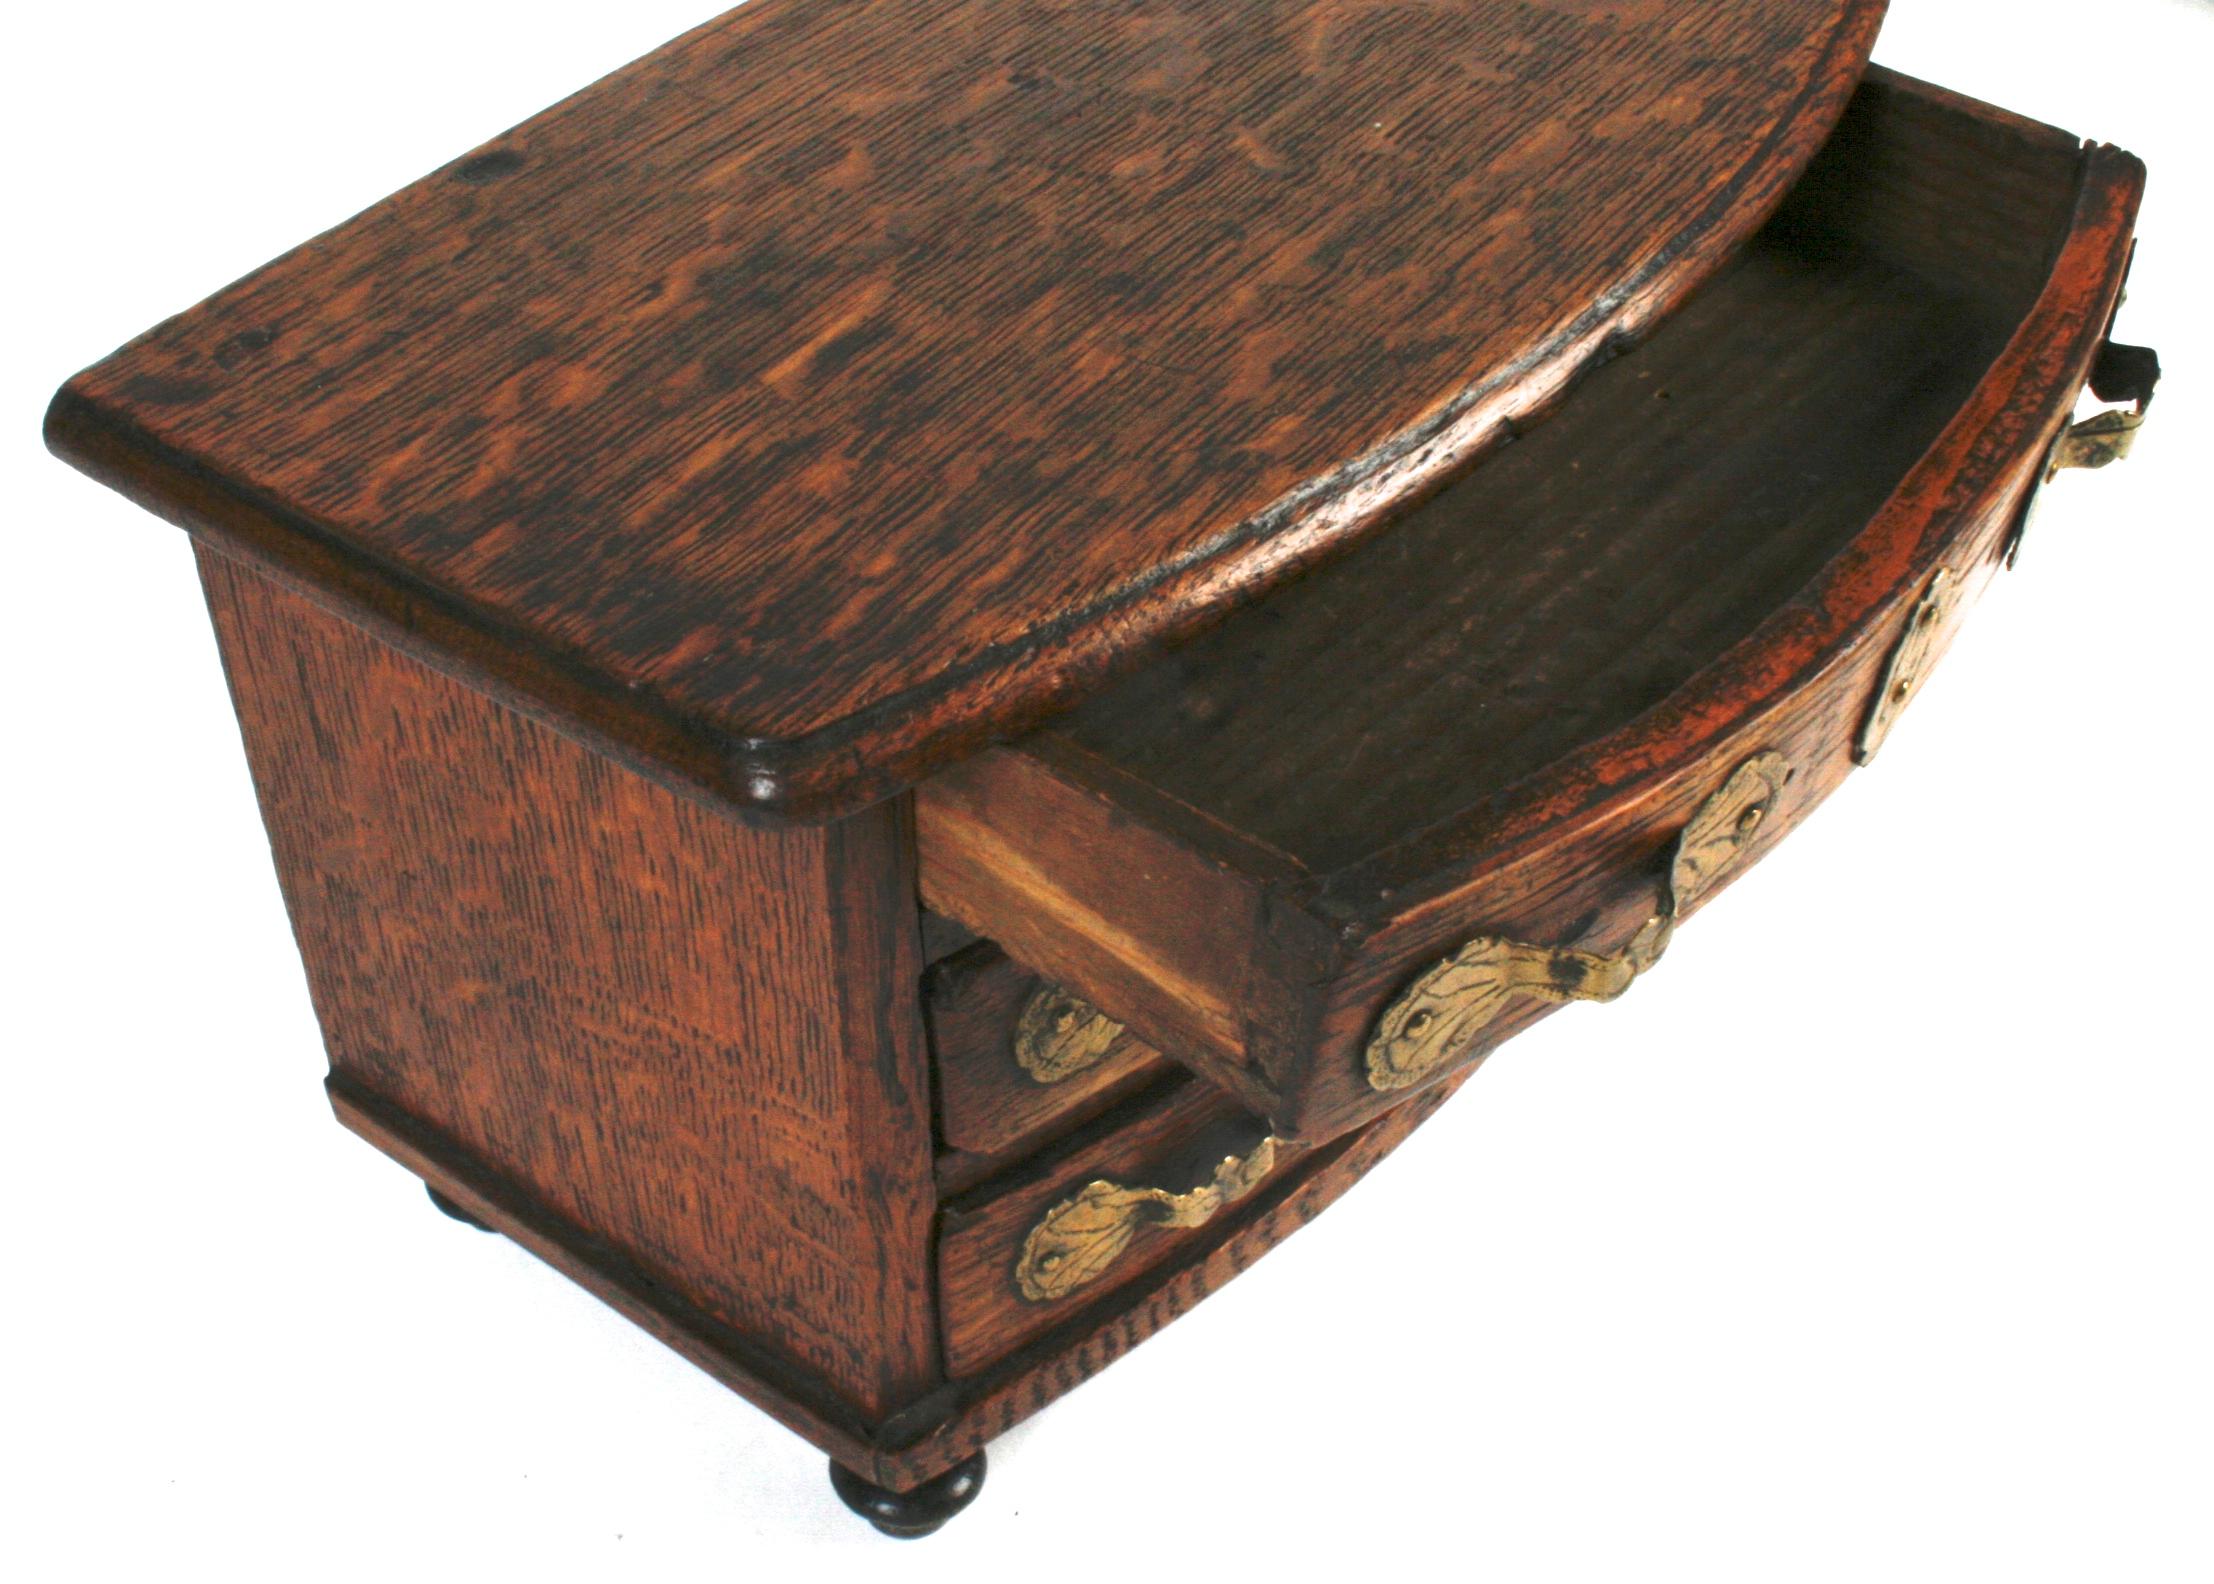 This handsome little oak chest has many of the same details of its larger counterparts. The bow fronted conforming top sits on three bowed drawers all with original brass pulls and escutcheons, and stands on small turned bun feet and engraved